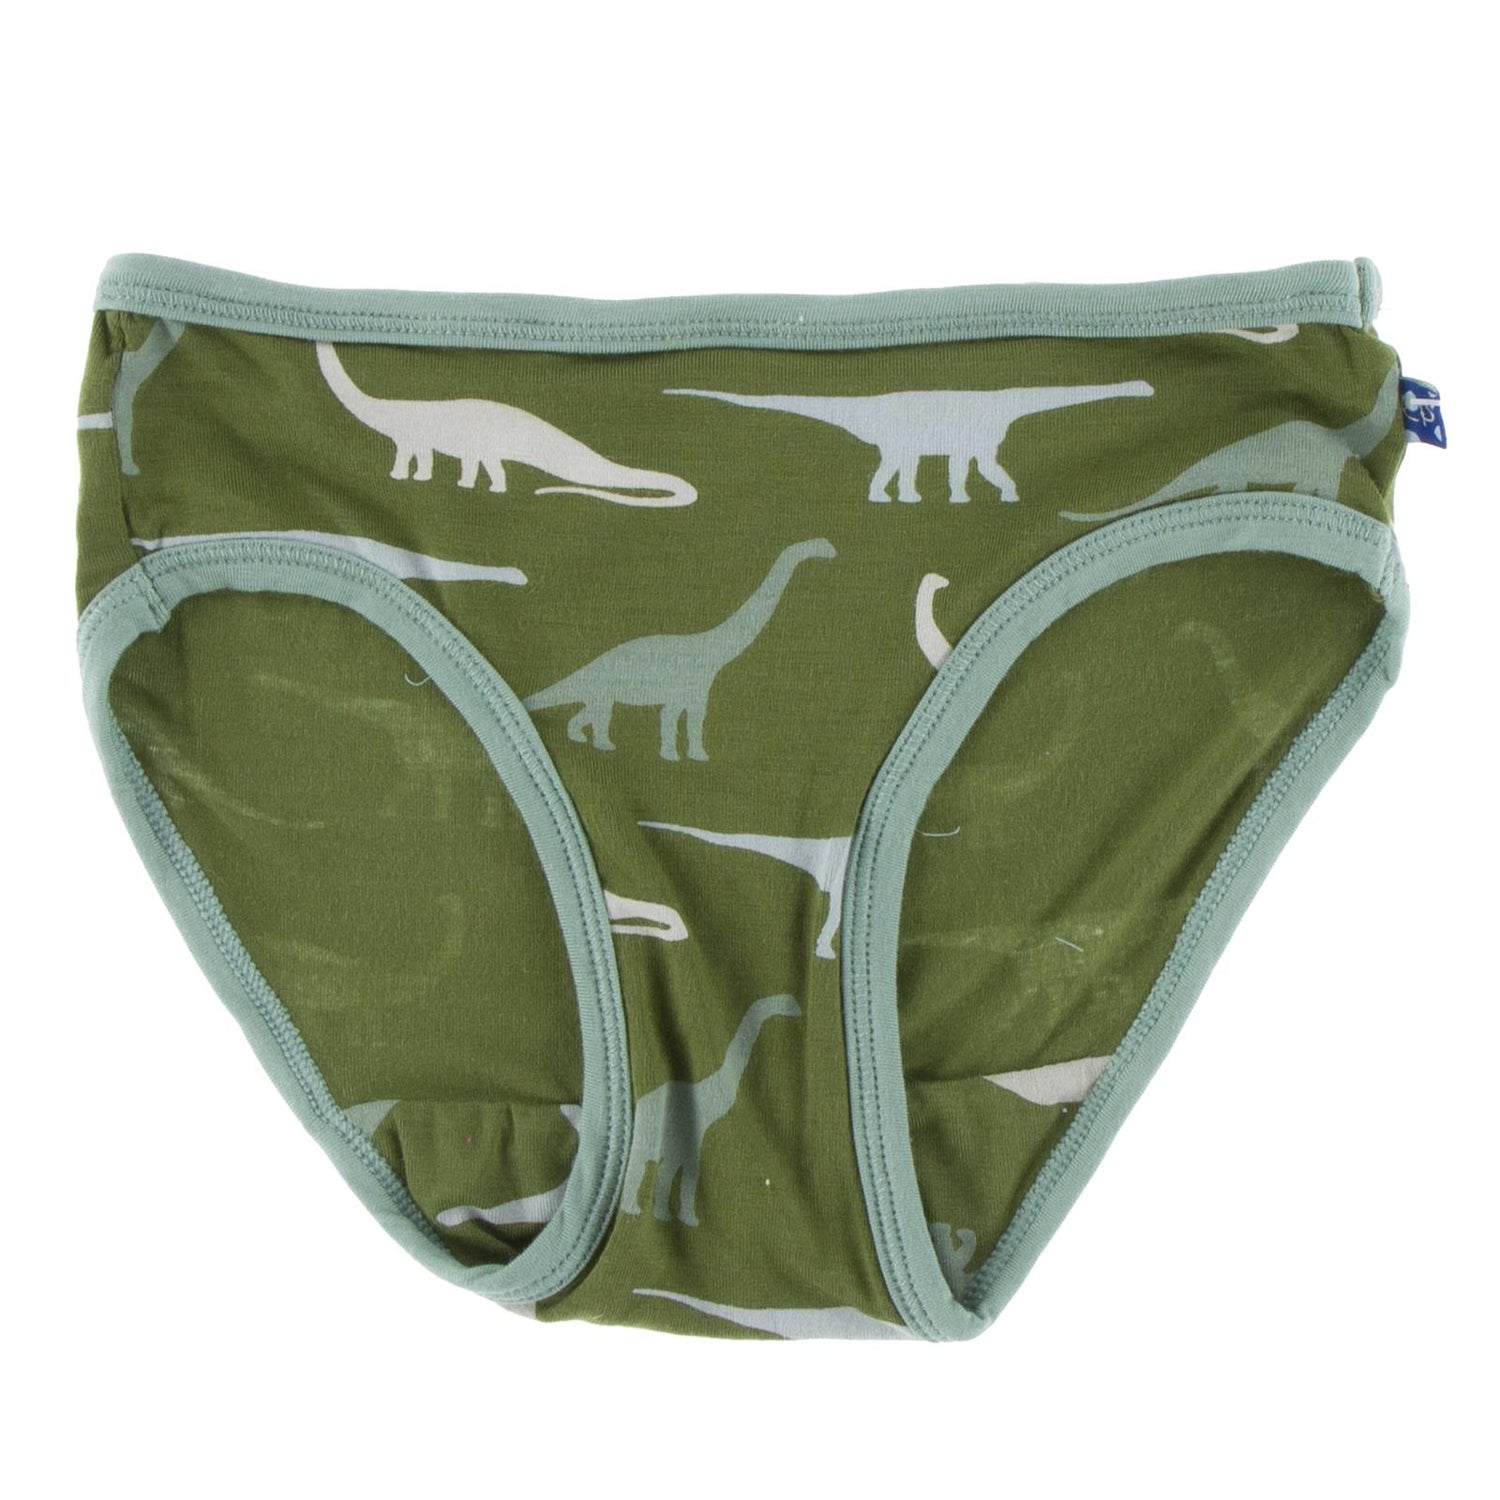 Print Girl Underwear in Moss Sauropods with Shore